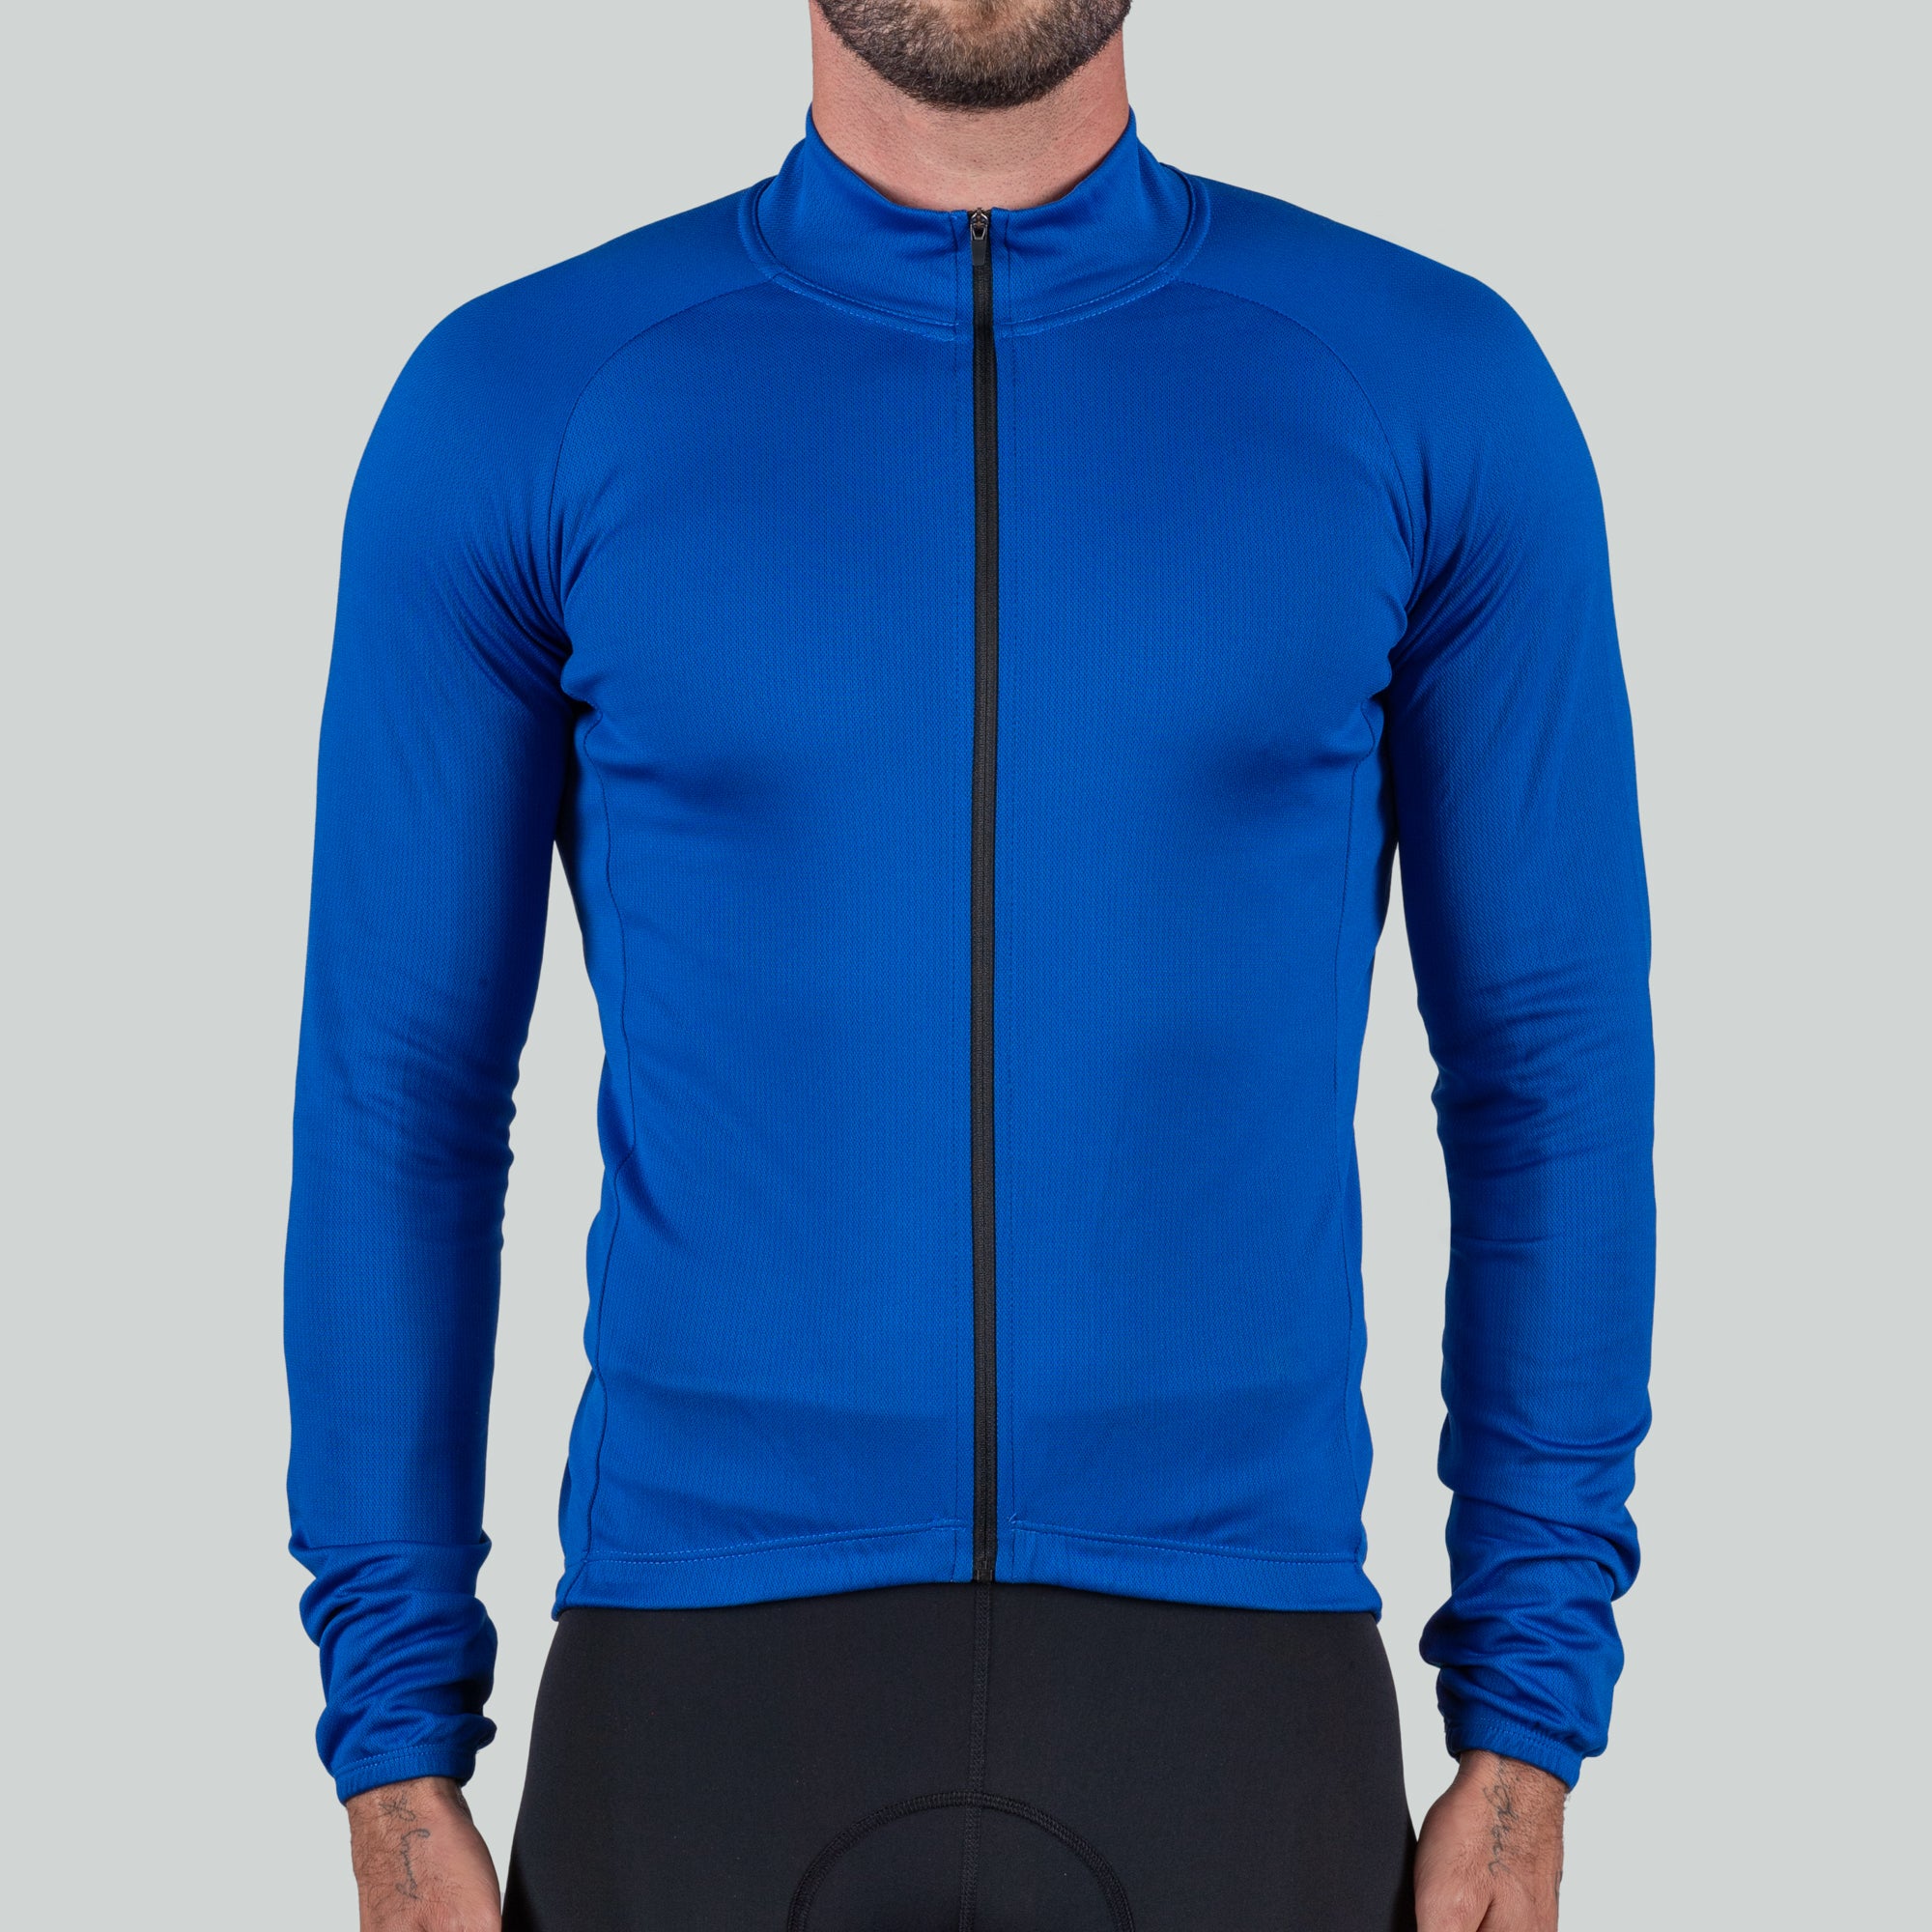 PRO THERMAL MID LS JERSEY